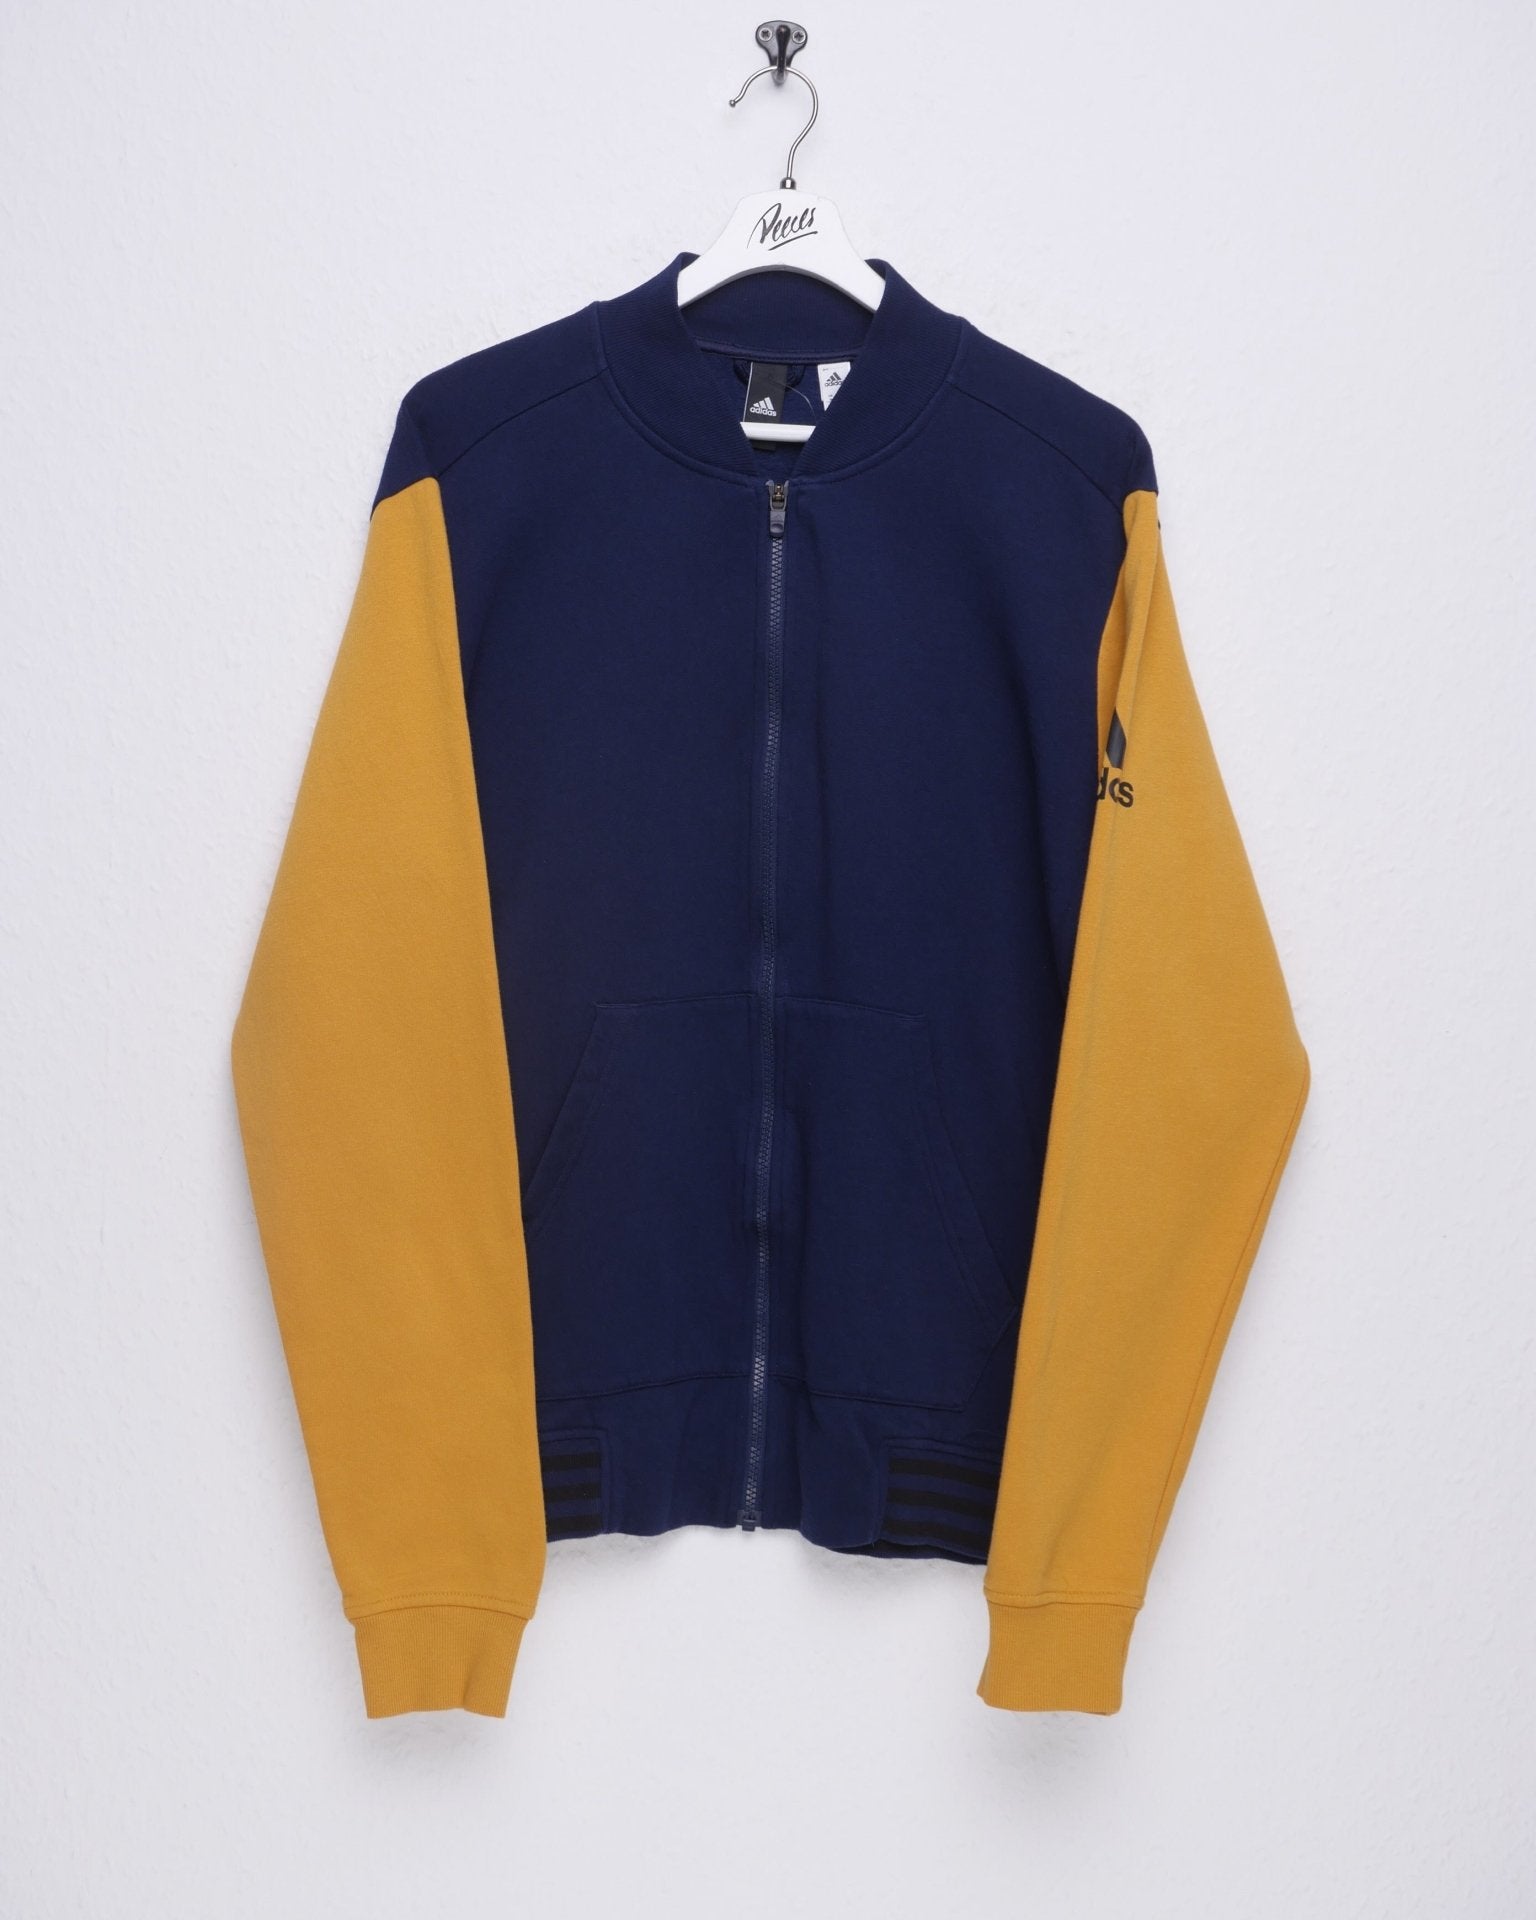 Adidas embroidered Logo two toned zip Sweater - Peeces